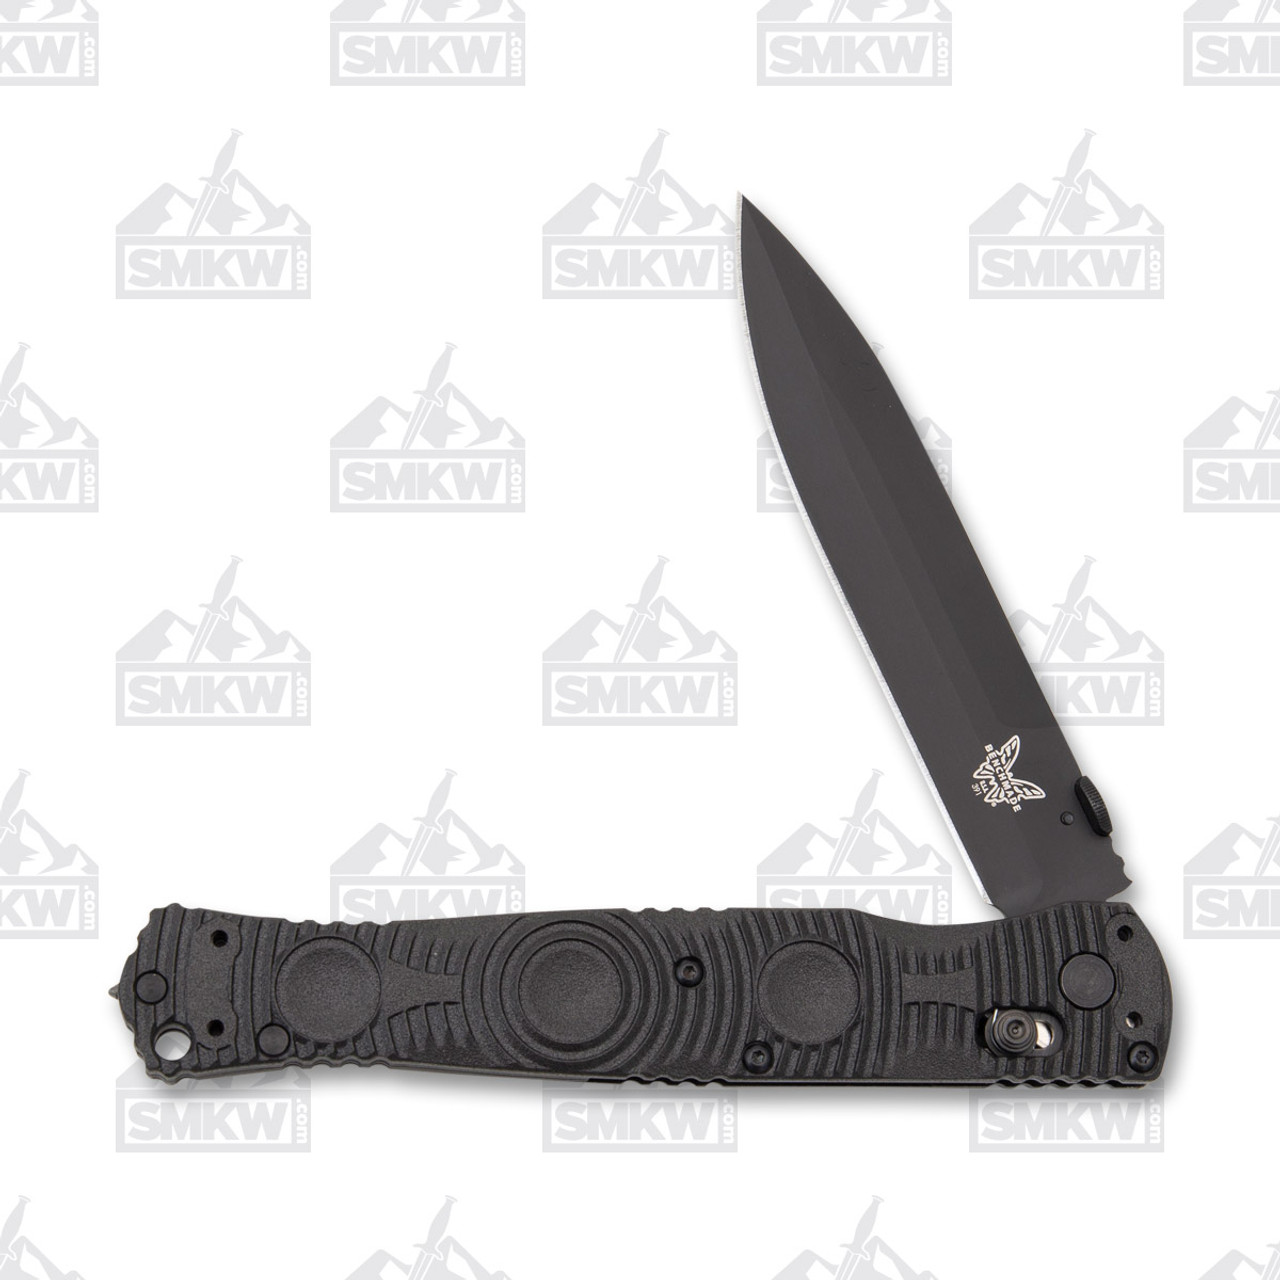 Benchmade 391T SOCP Tactical Folder Knife Blade with Manual Knife Sharpener  